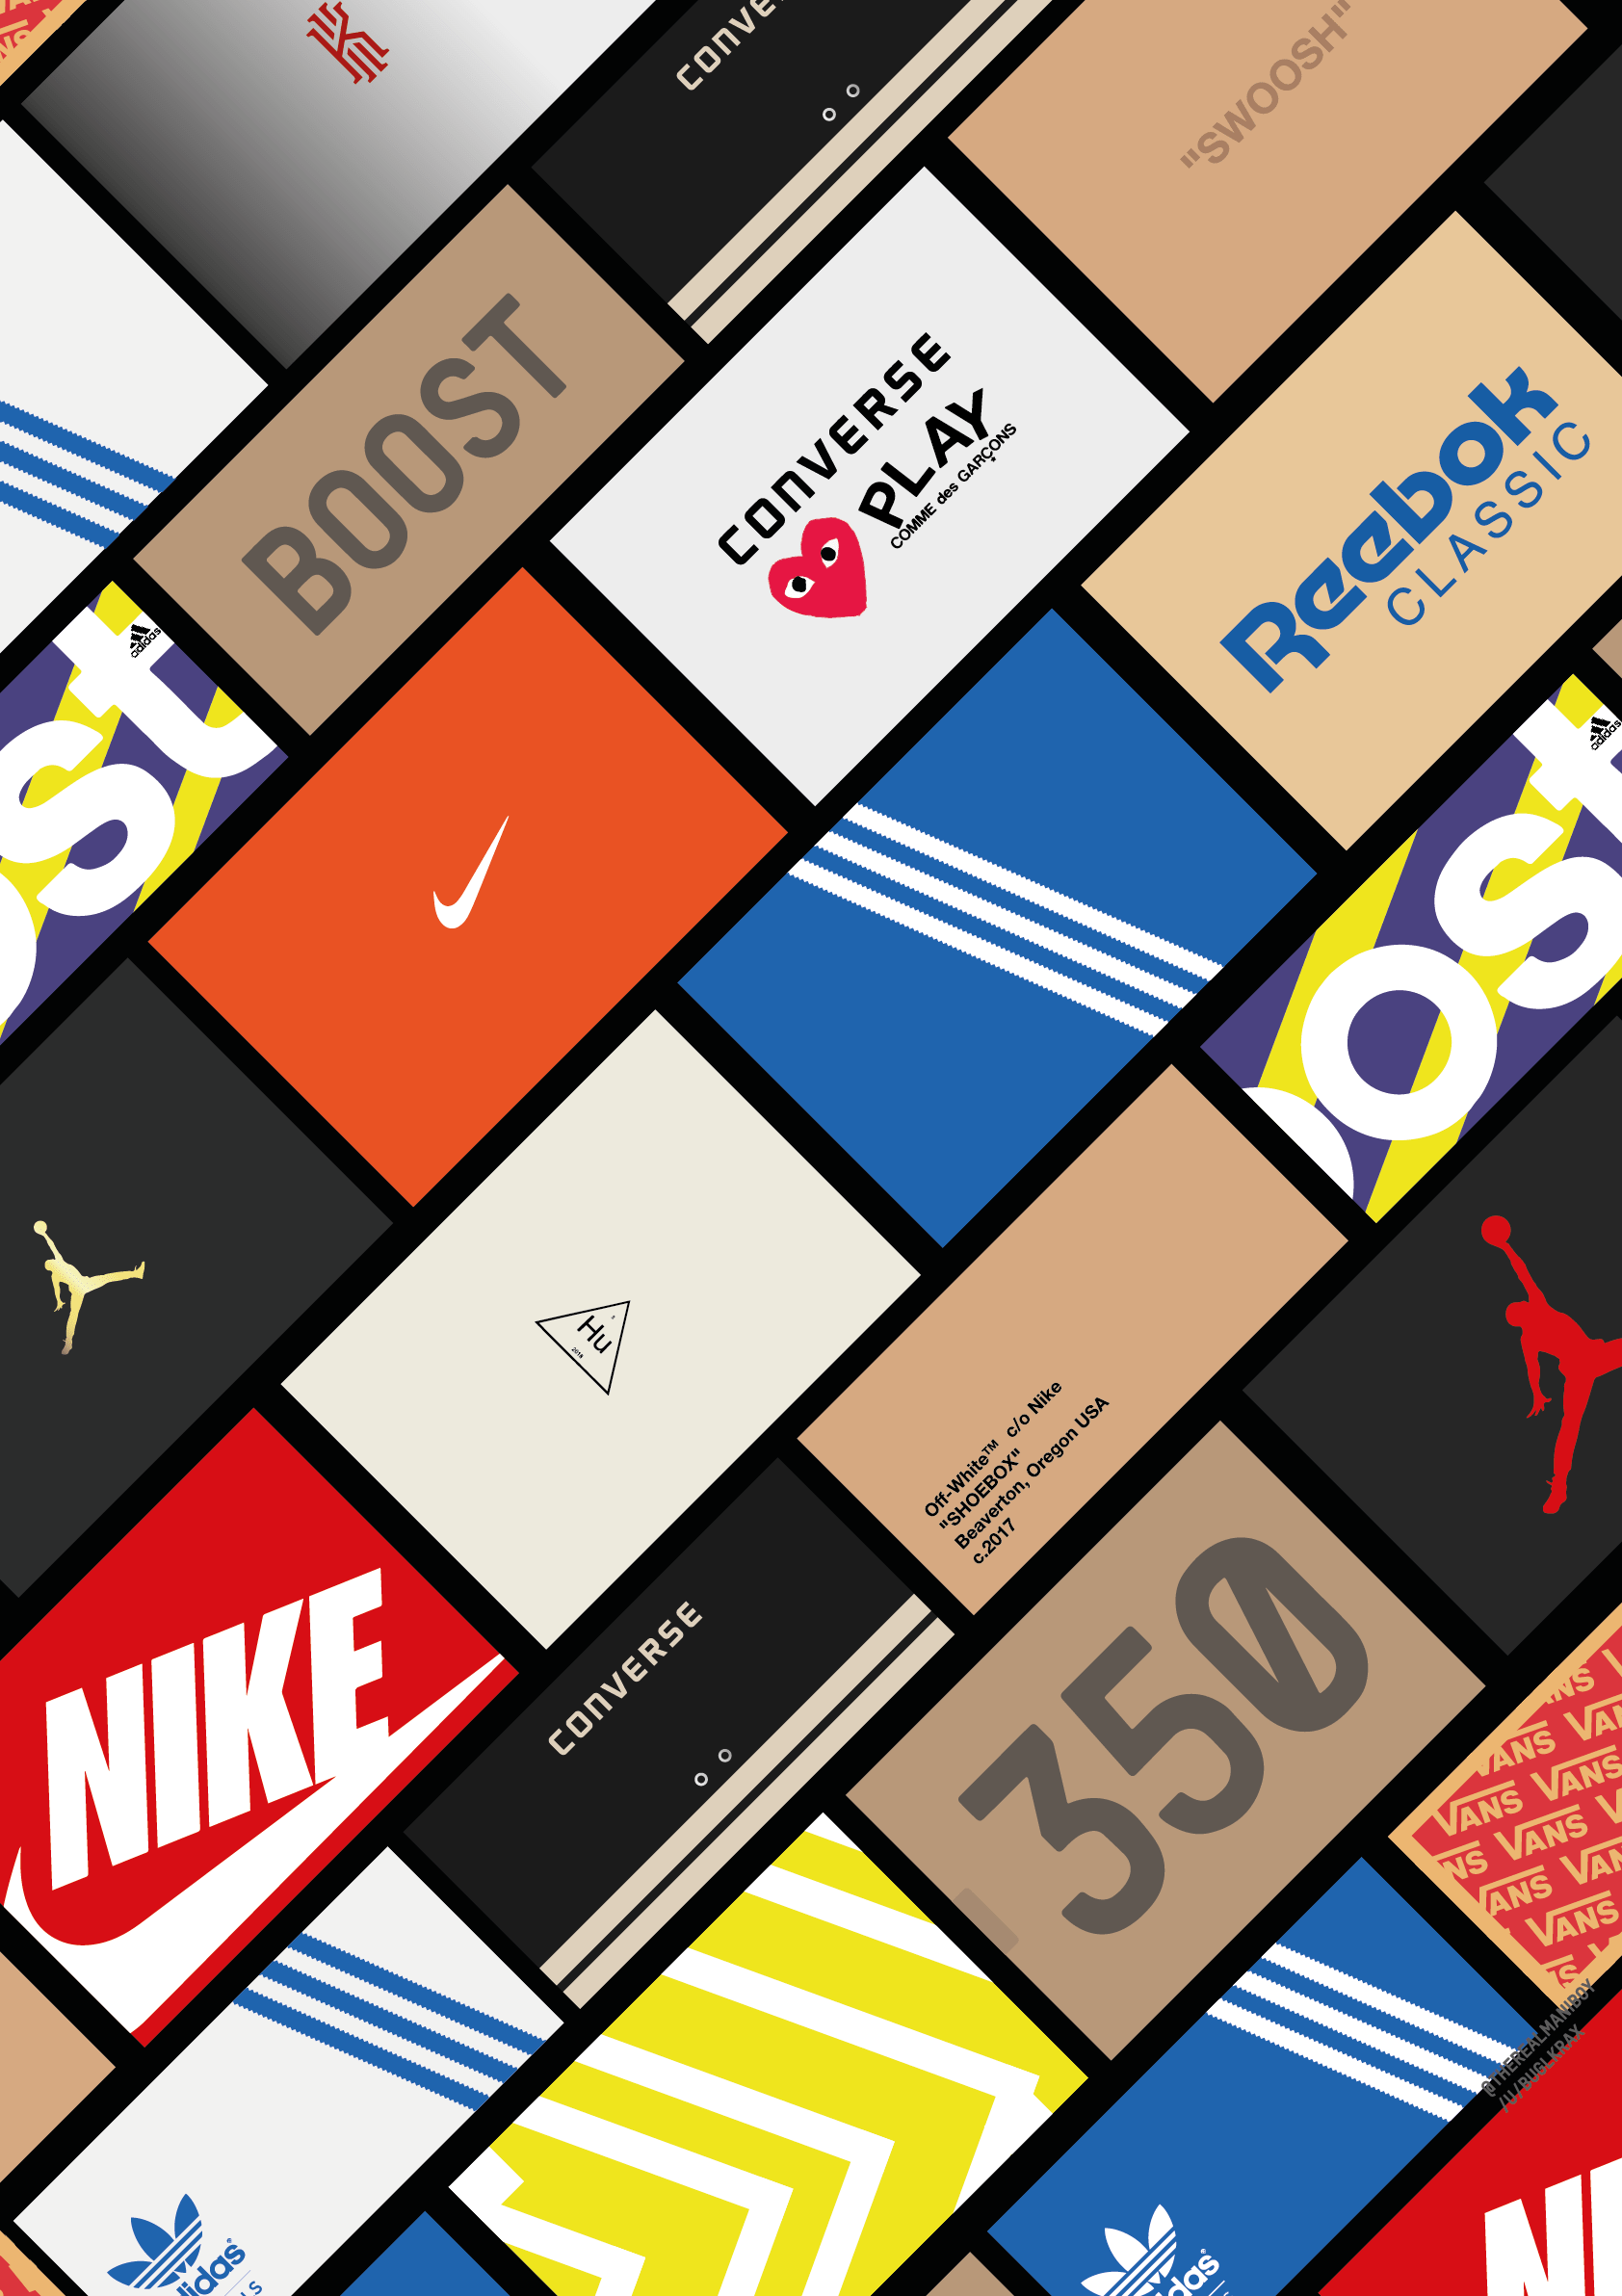 A collection of logos from various brands - Shoes, Nike, Converse